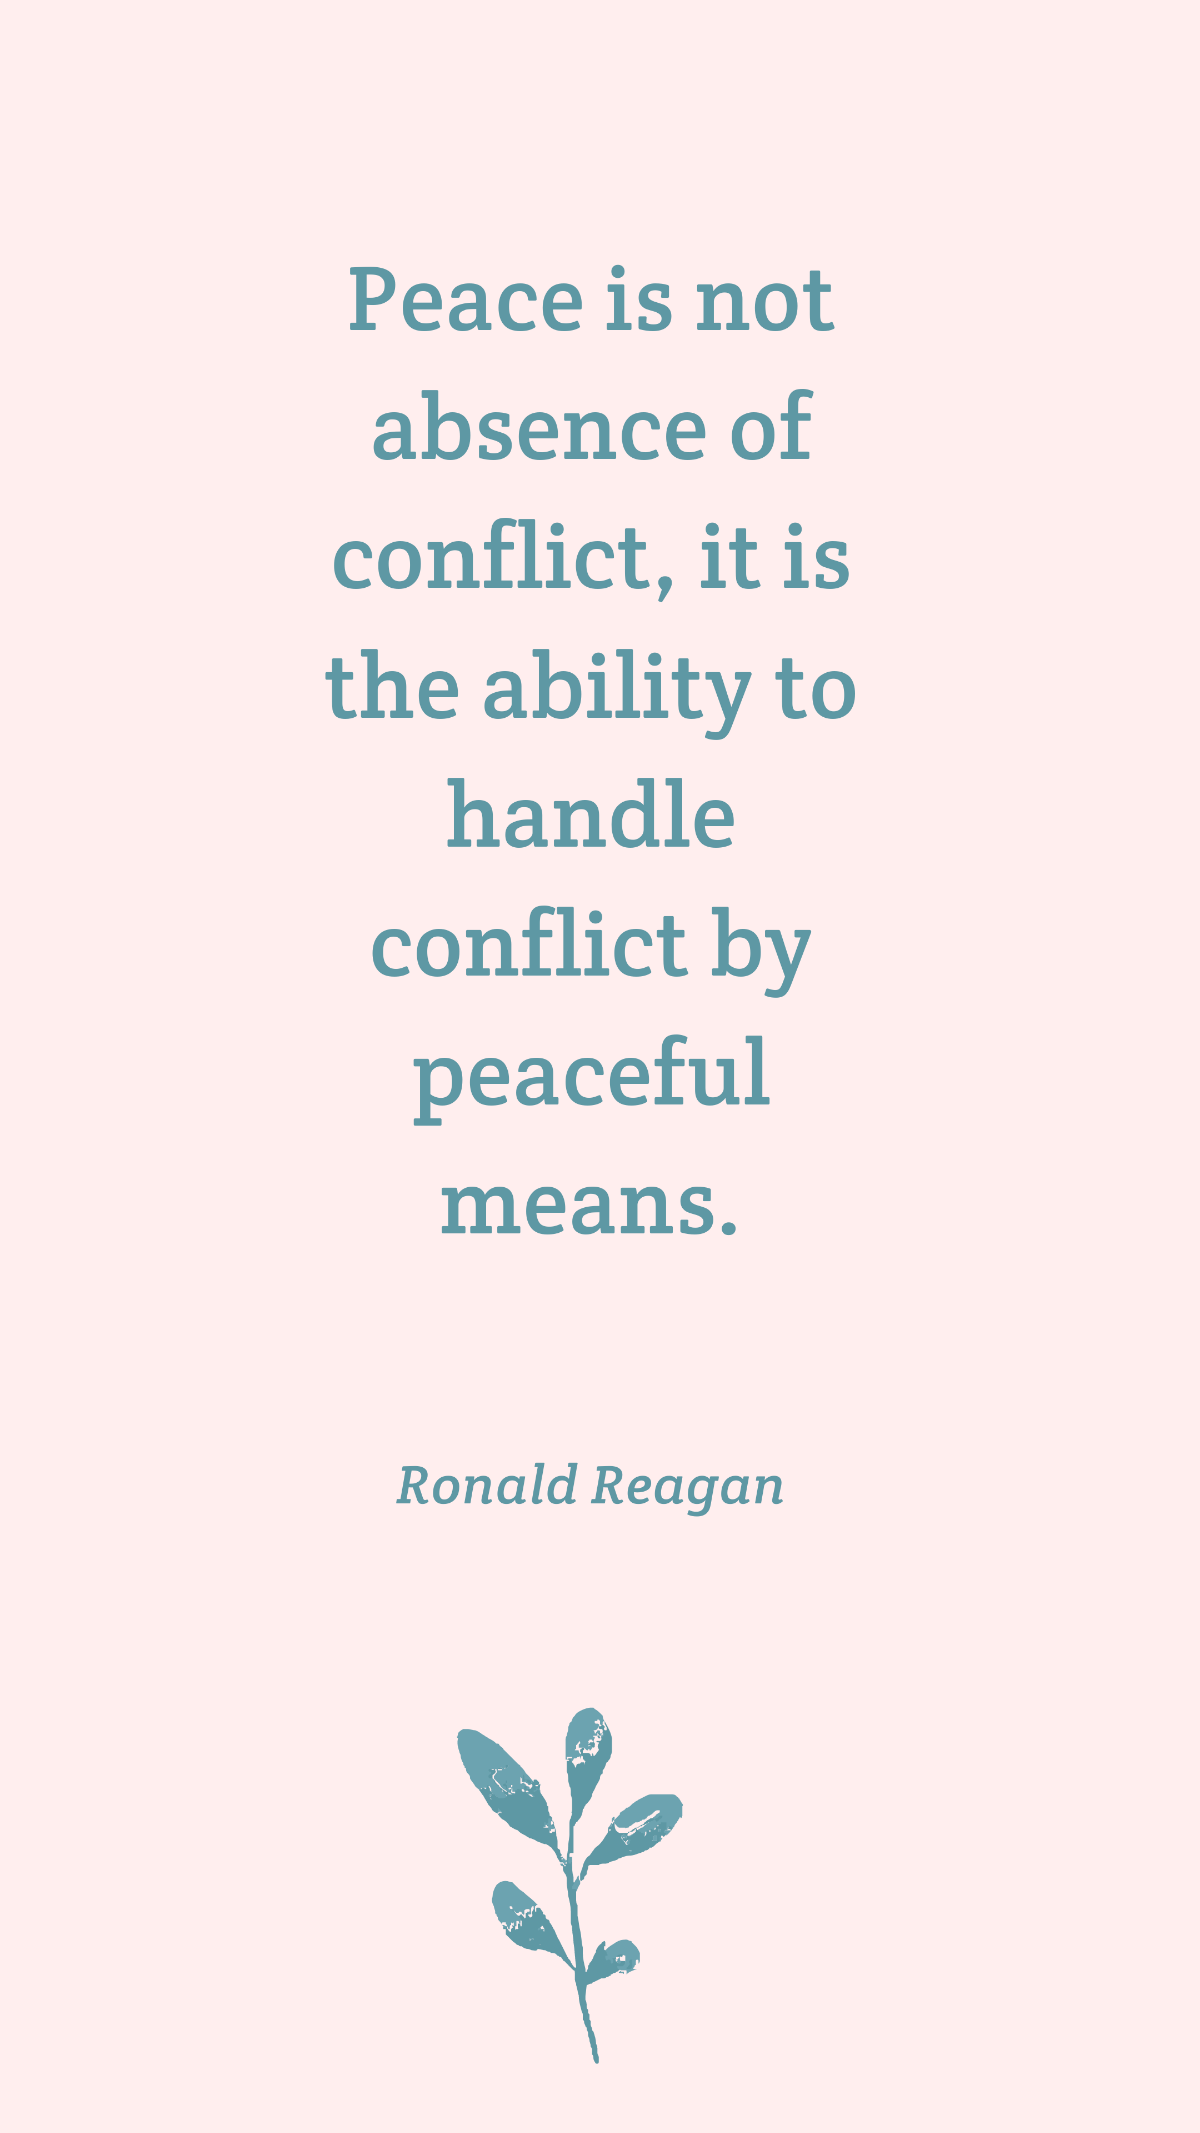 Free Ronald Reagan - Peace is not absence of conflict, it is the ability to handle conflict by peaceful means.  Template